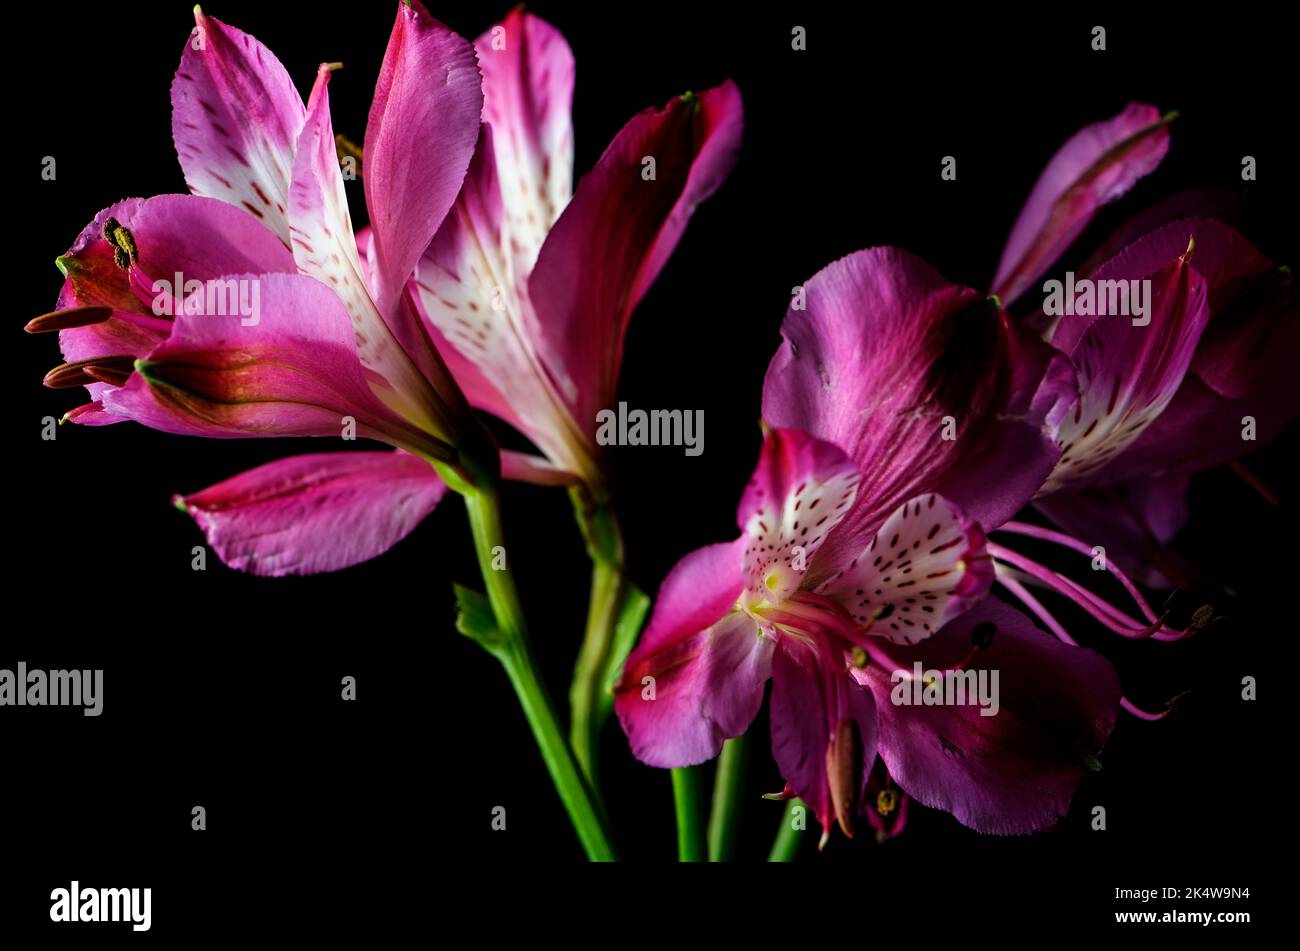 Pink Peruvian Lily, or Lily of the Incas, flower on a black background with vibrant colors Stock Photo